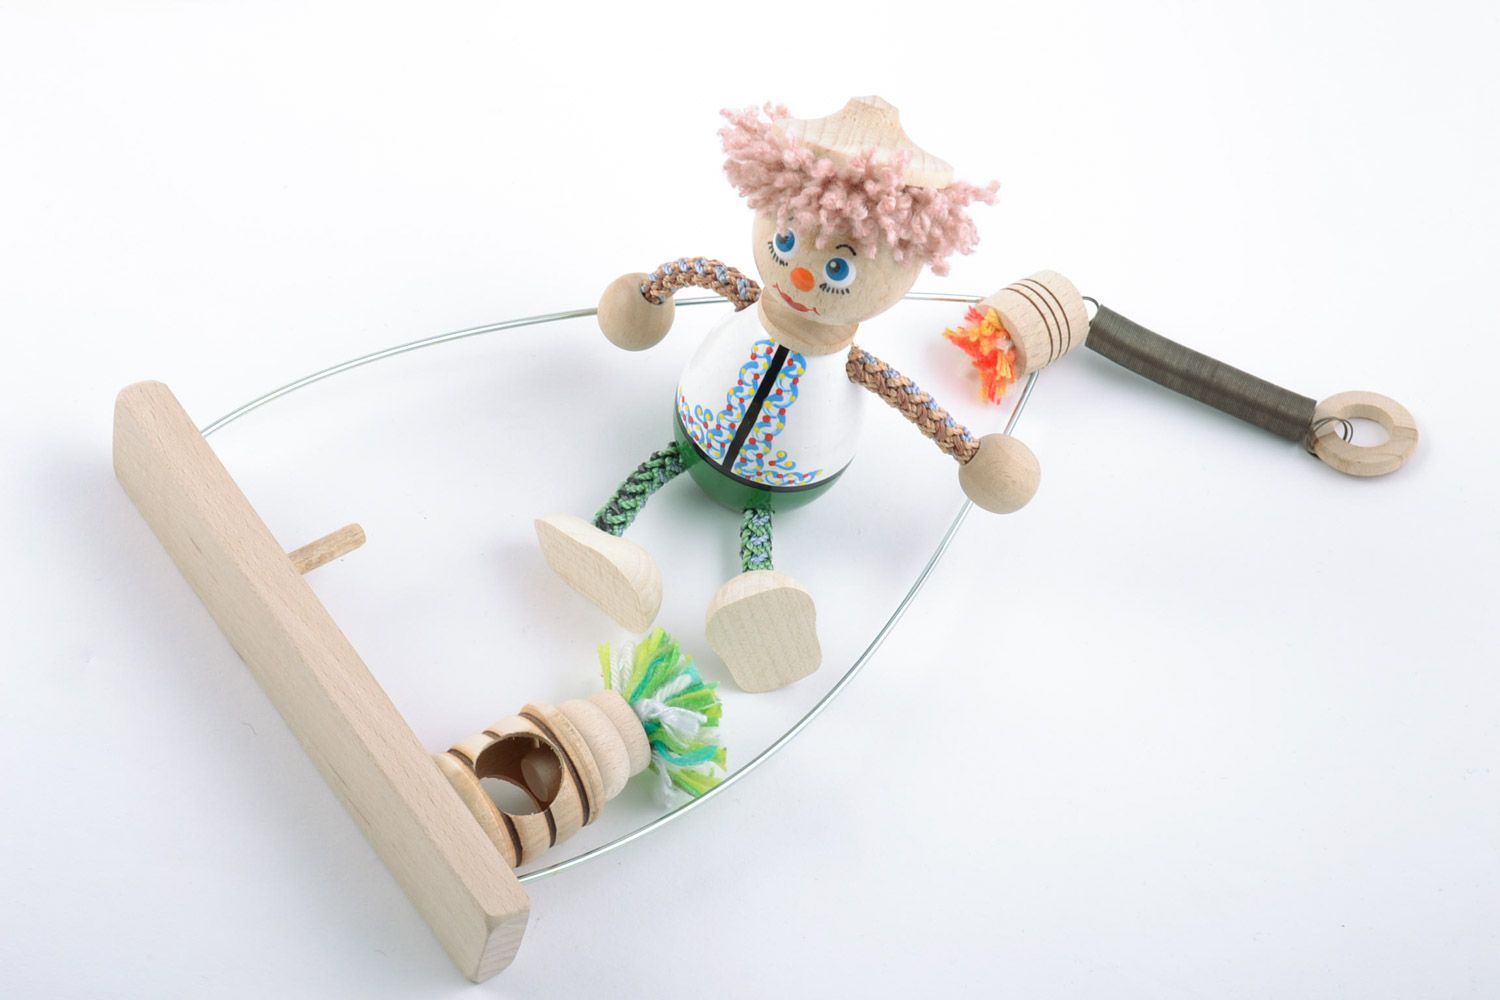 Homemade painted wooden eco toy for children and interior photo 2